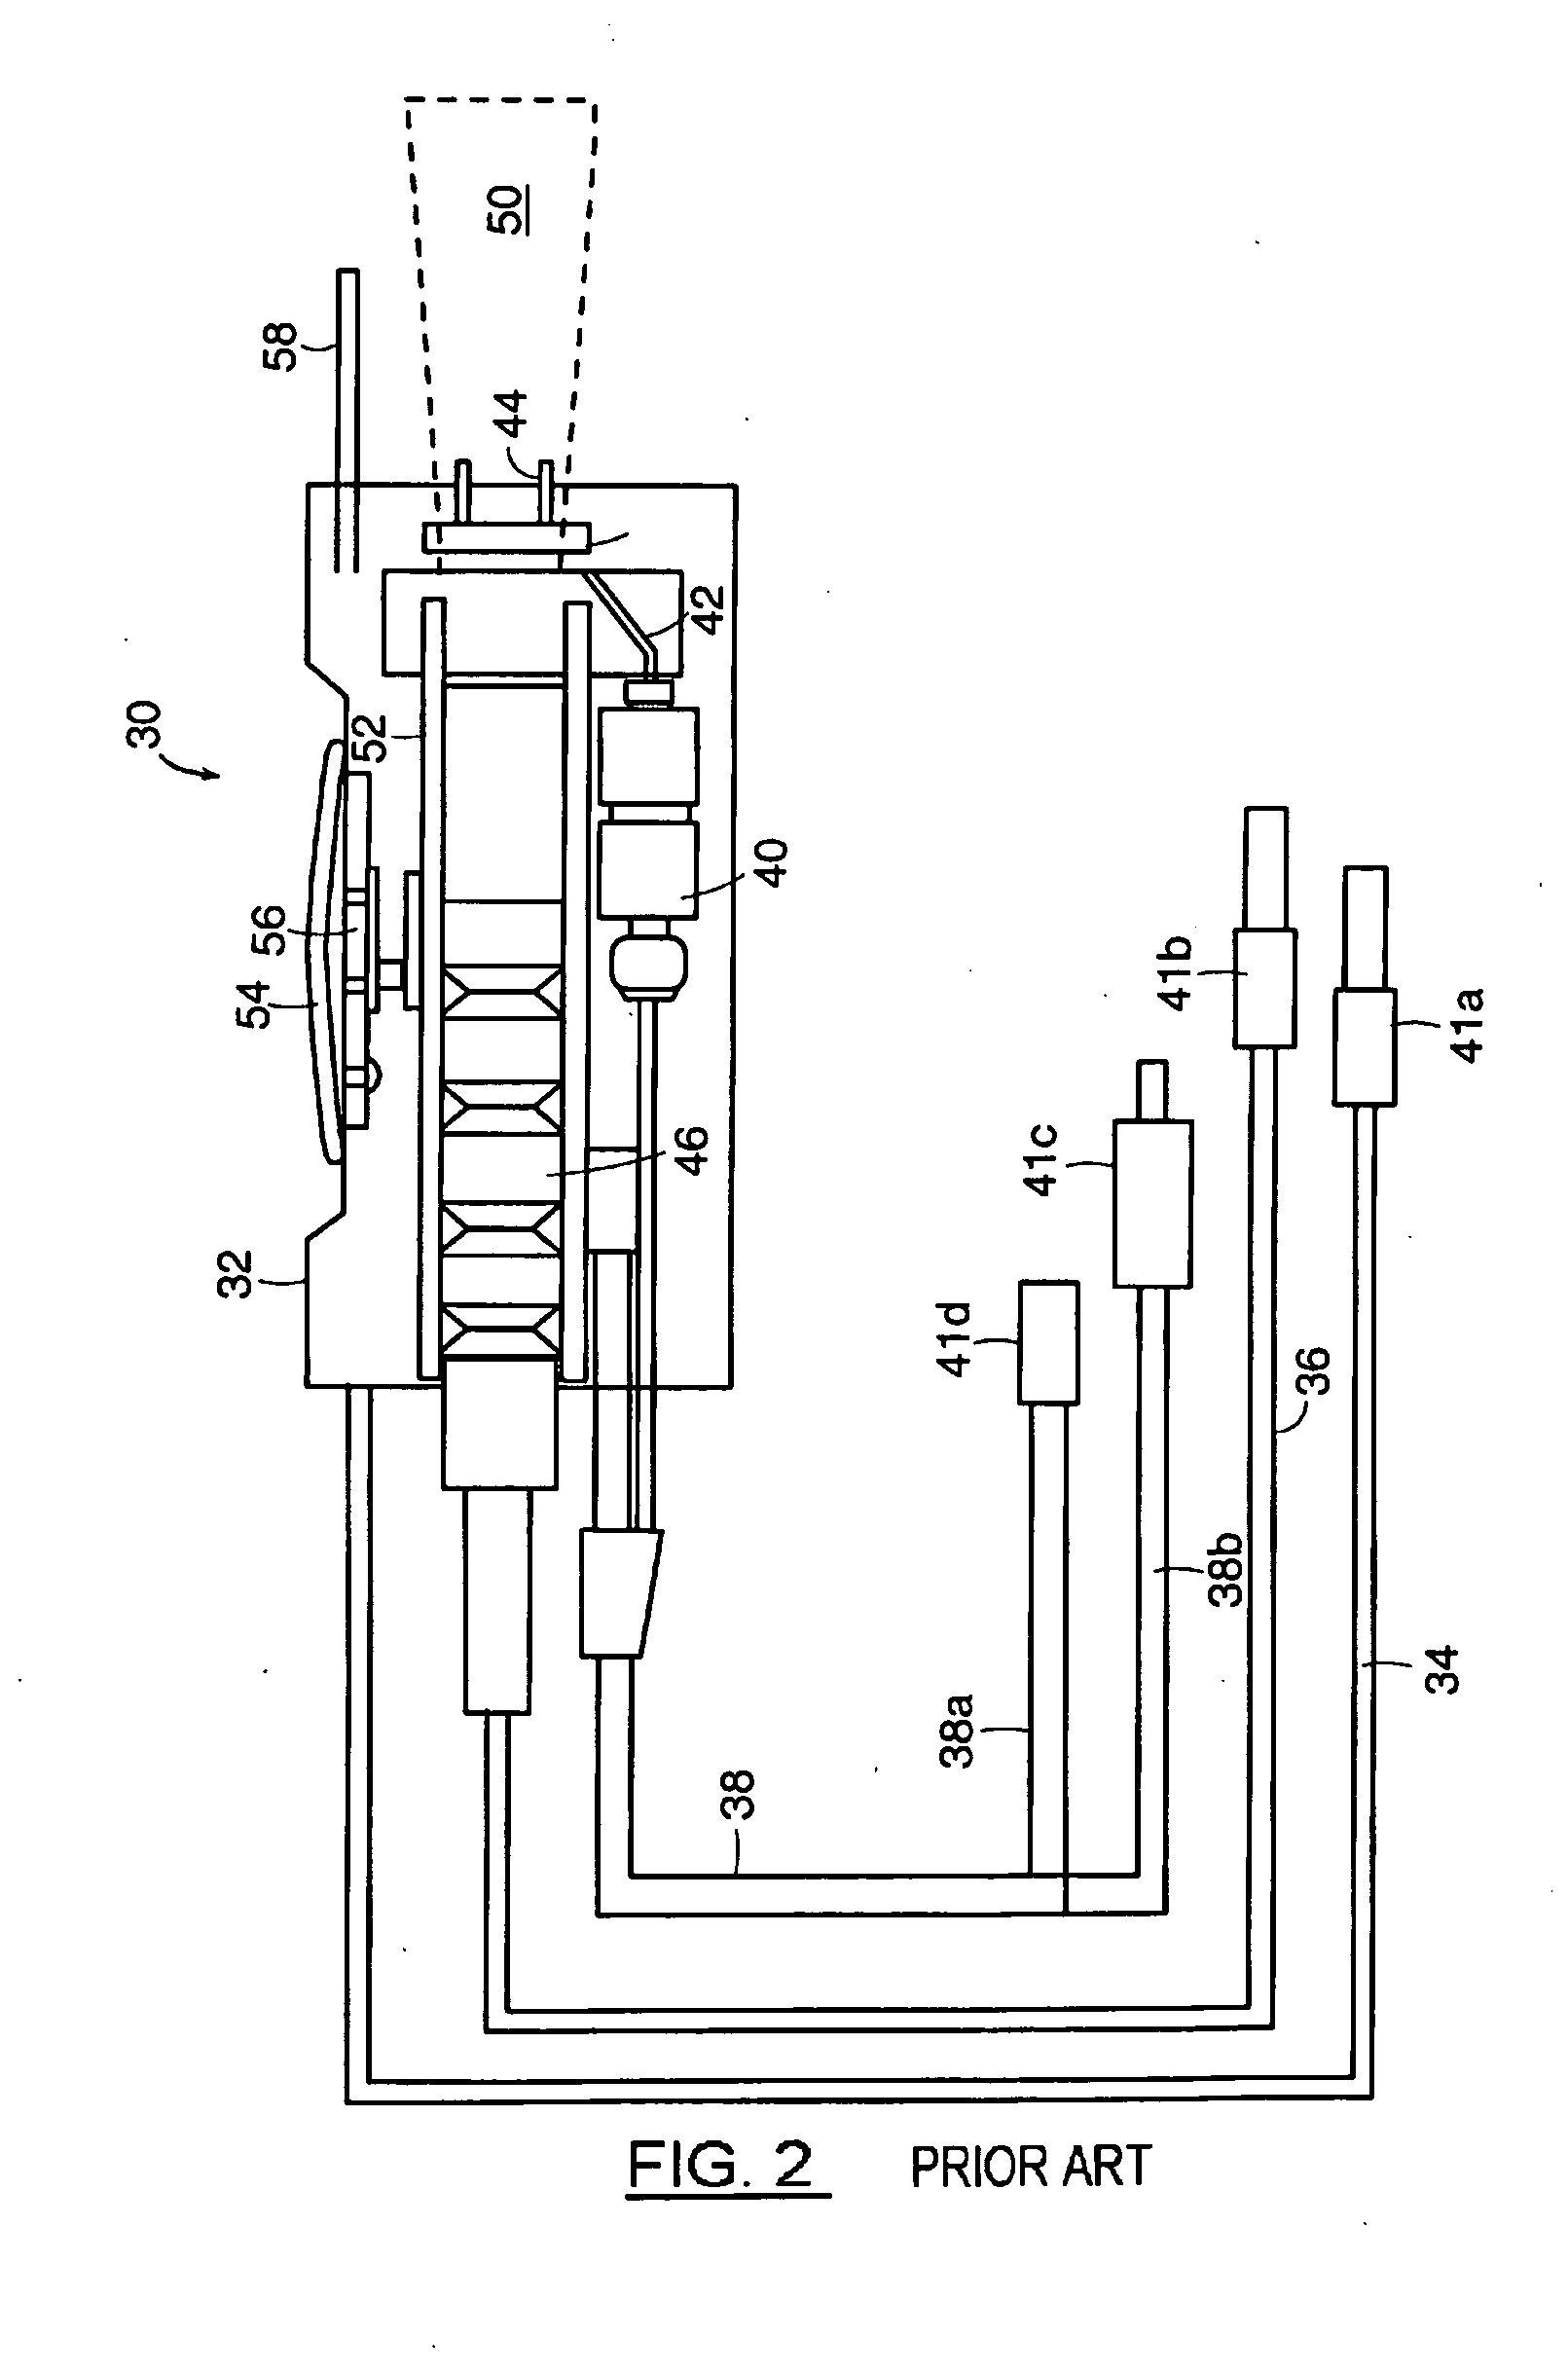 Treatment method and apparatus for basal cell carcinoma